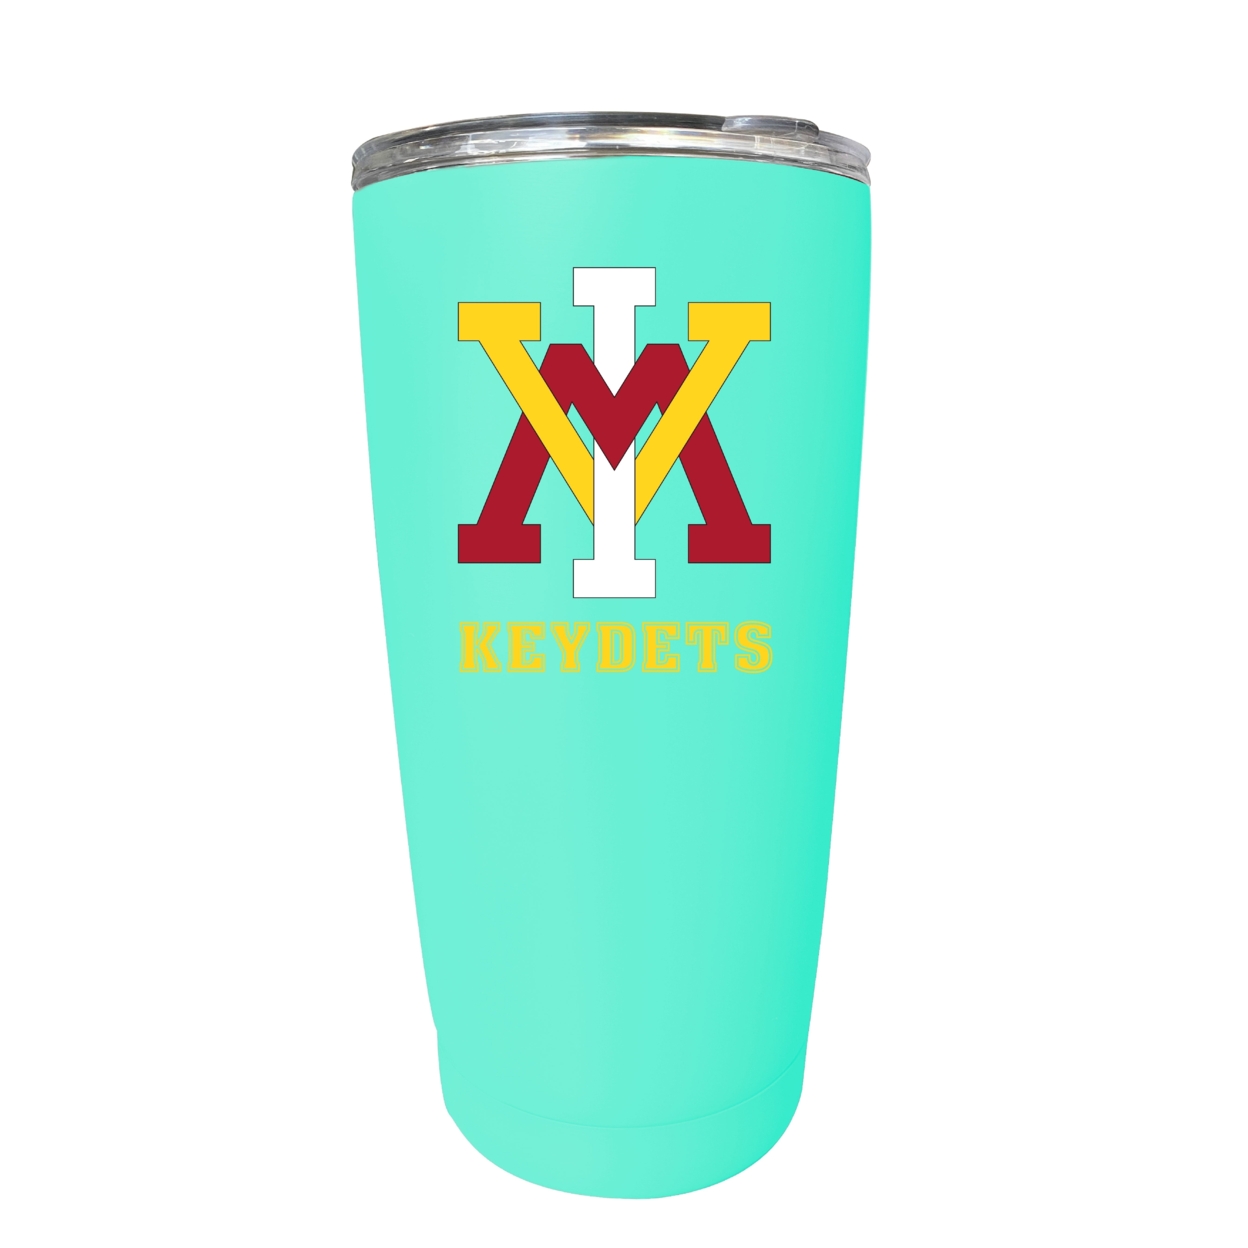 VMI Keydets 16 Oz Insulated Stainless Steel Tumbler - Choose Your Color. - Seafoam